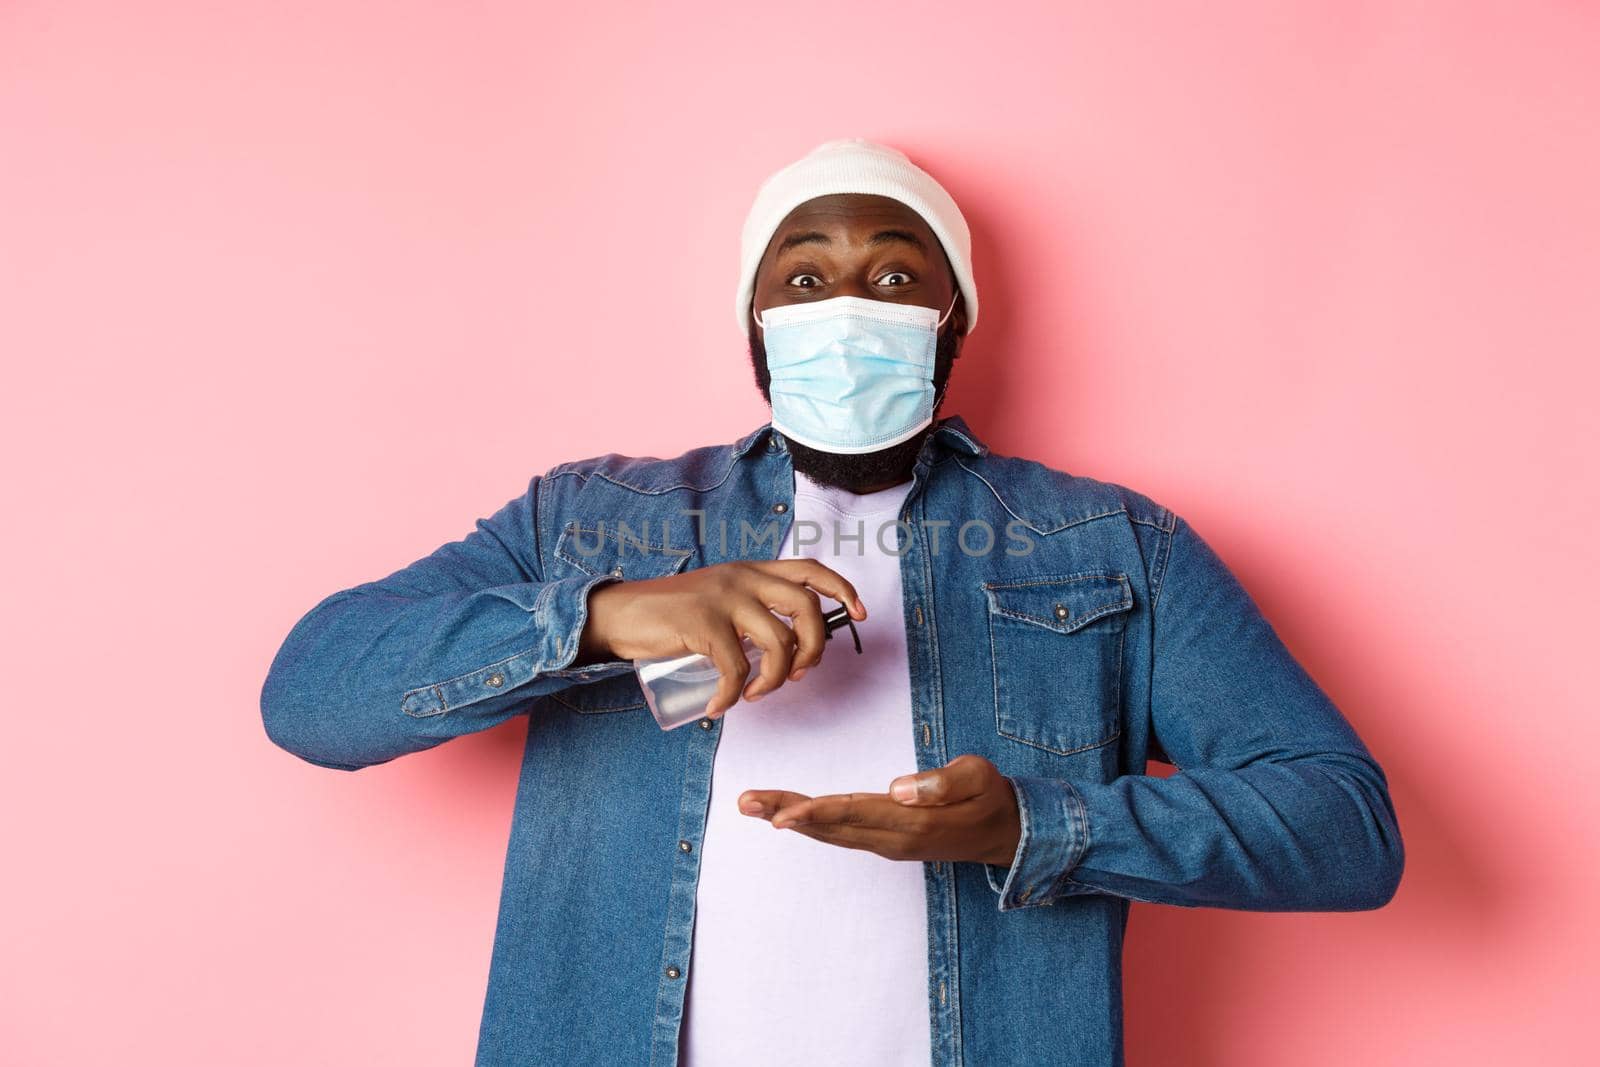 Covid-19, lifestyle and lockdown concept. Smiling african-american man in face mask cleaning hands with sanitizer, using antiseptic and looking at camera, pink background.